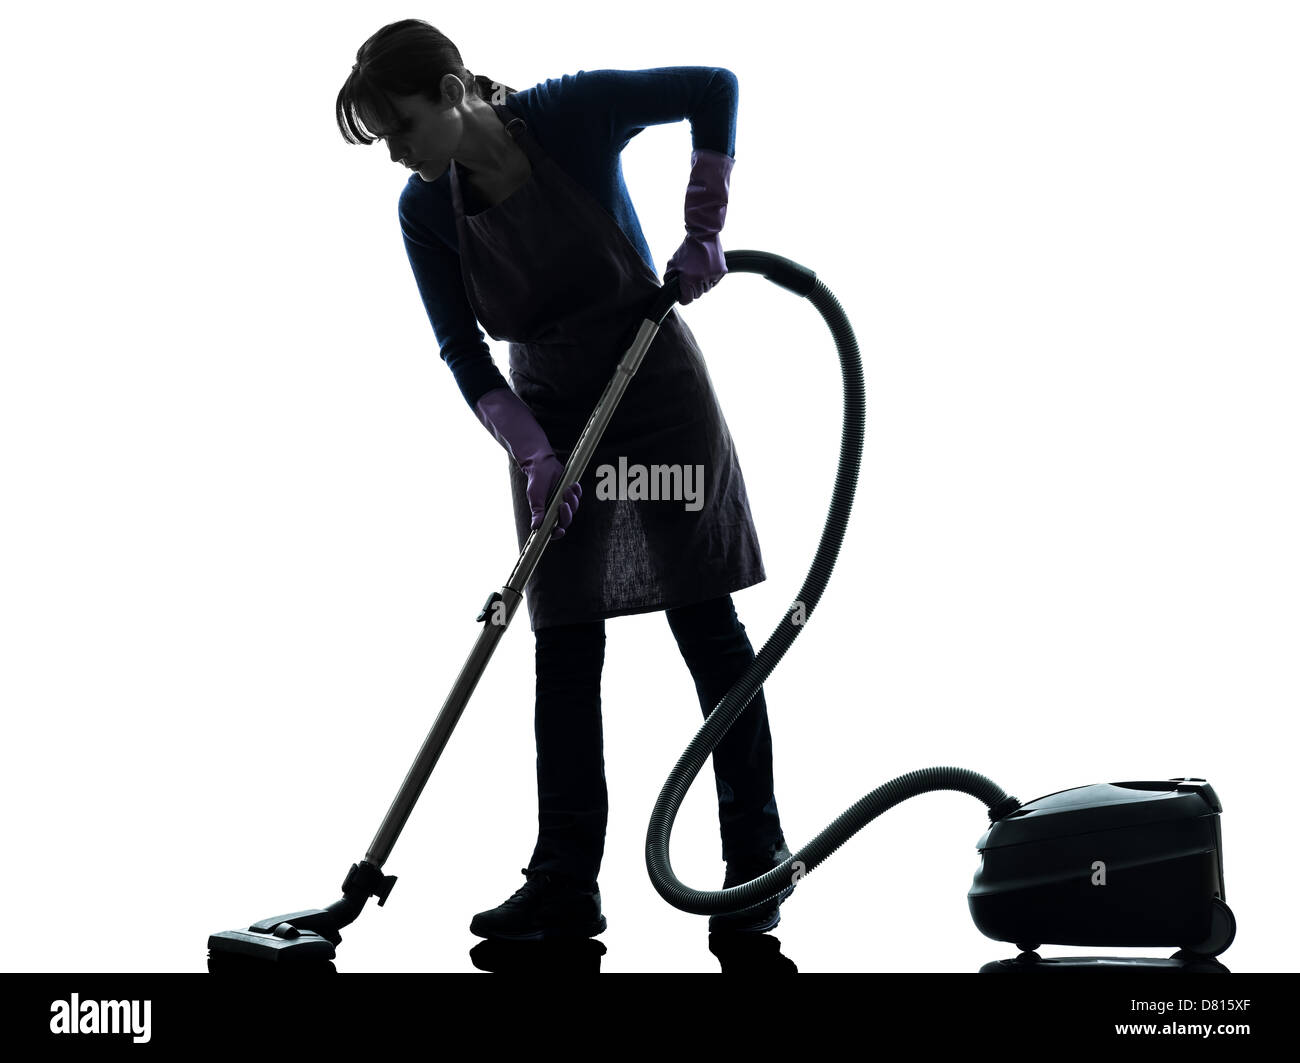 one  woman maid Vacuum Cleaner cleaning in silhouette studio isolated on white background Stock Photo